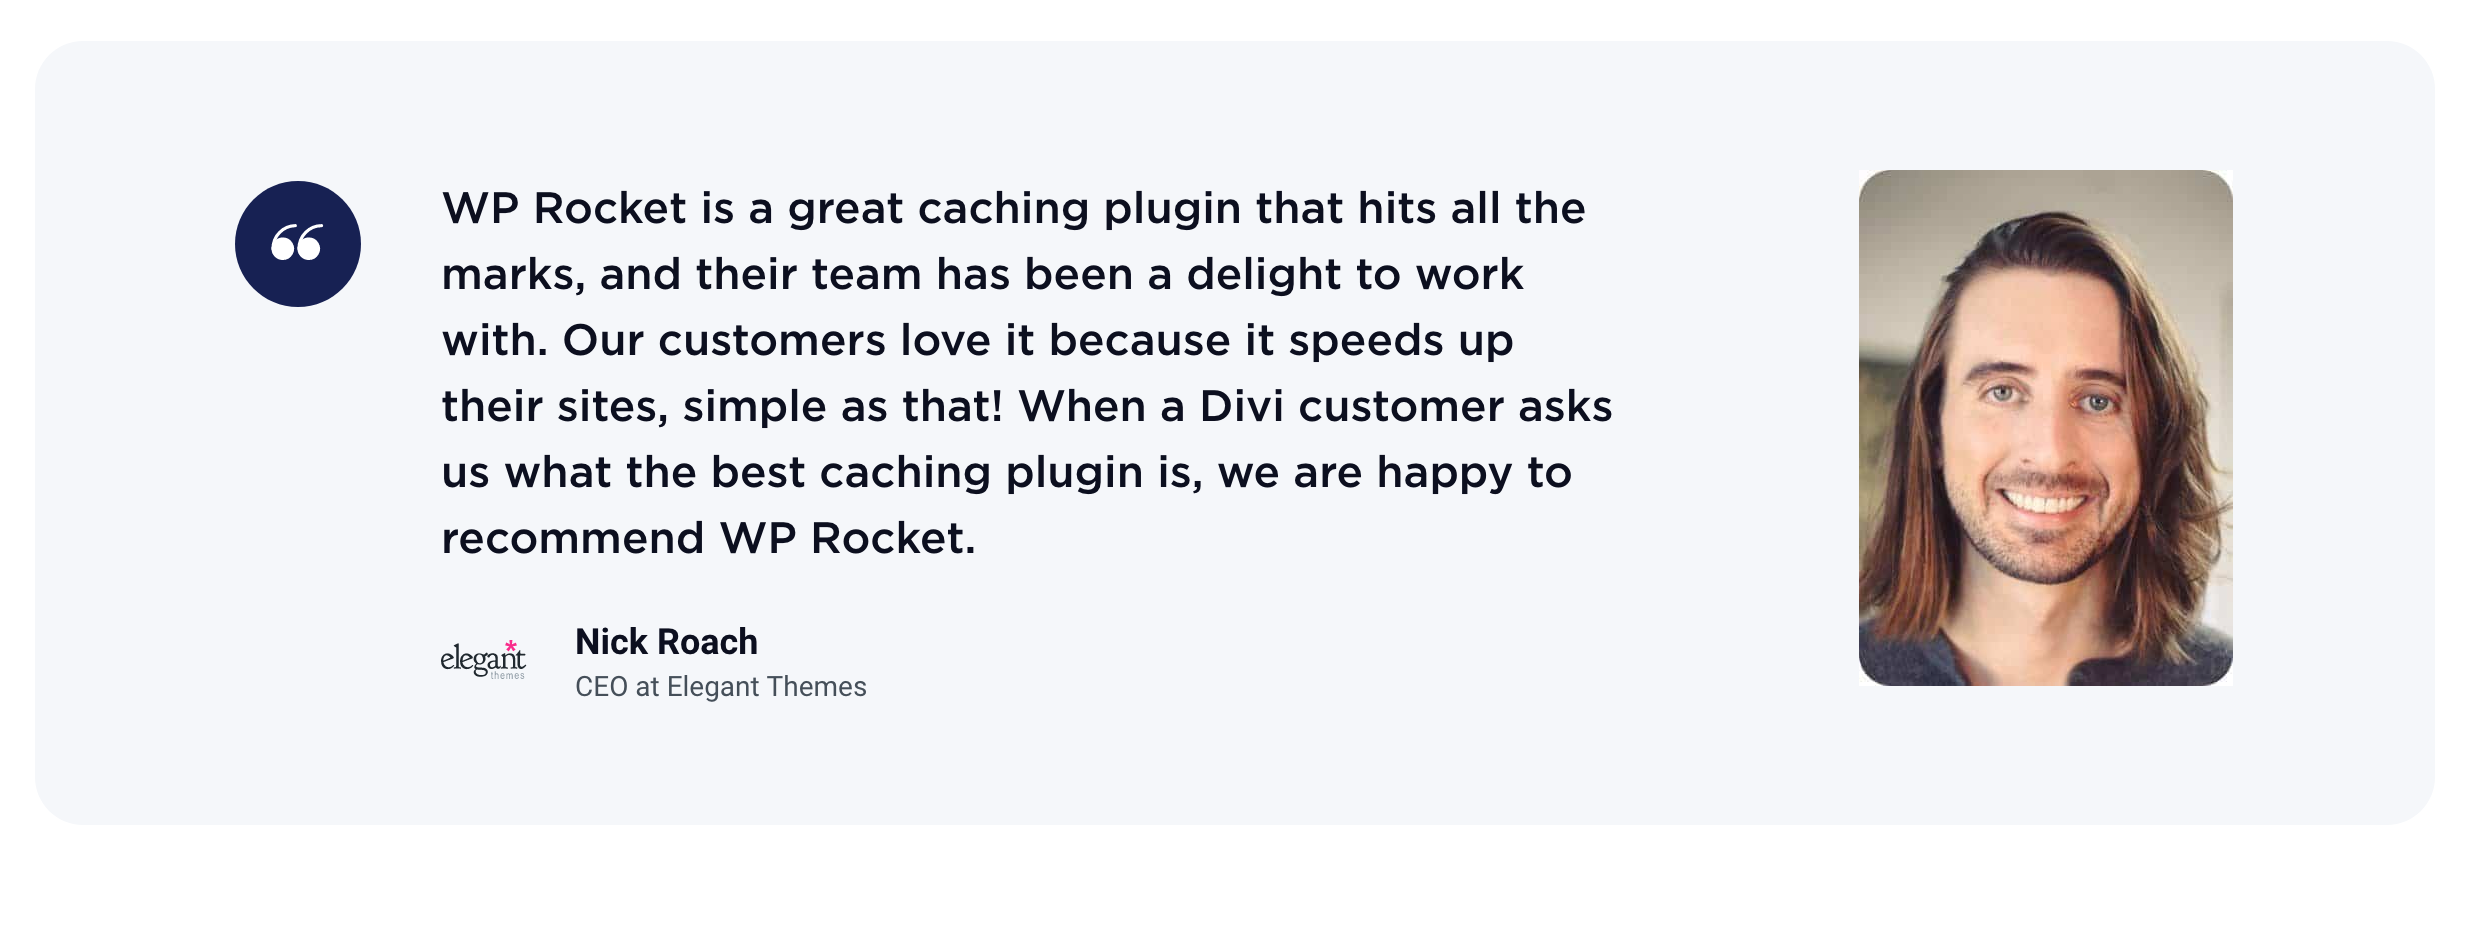 Nick Roach recommends WP Rocket.